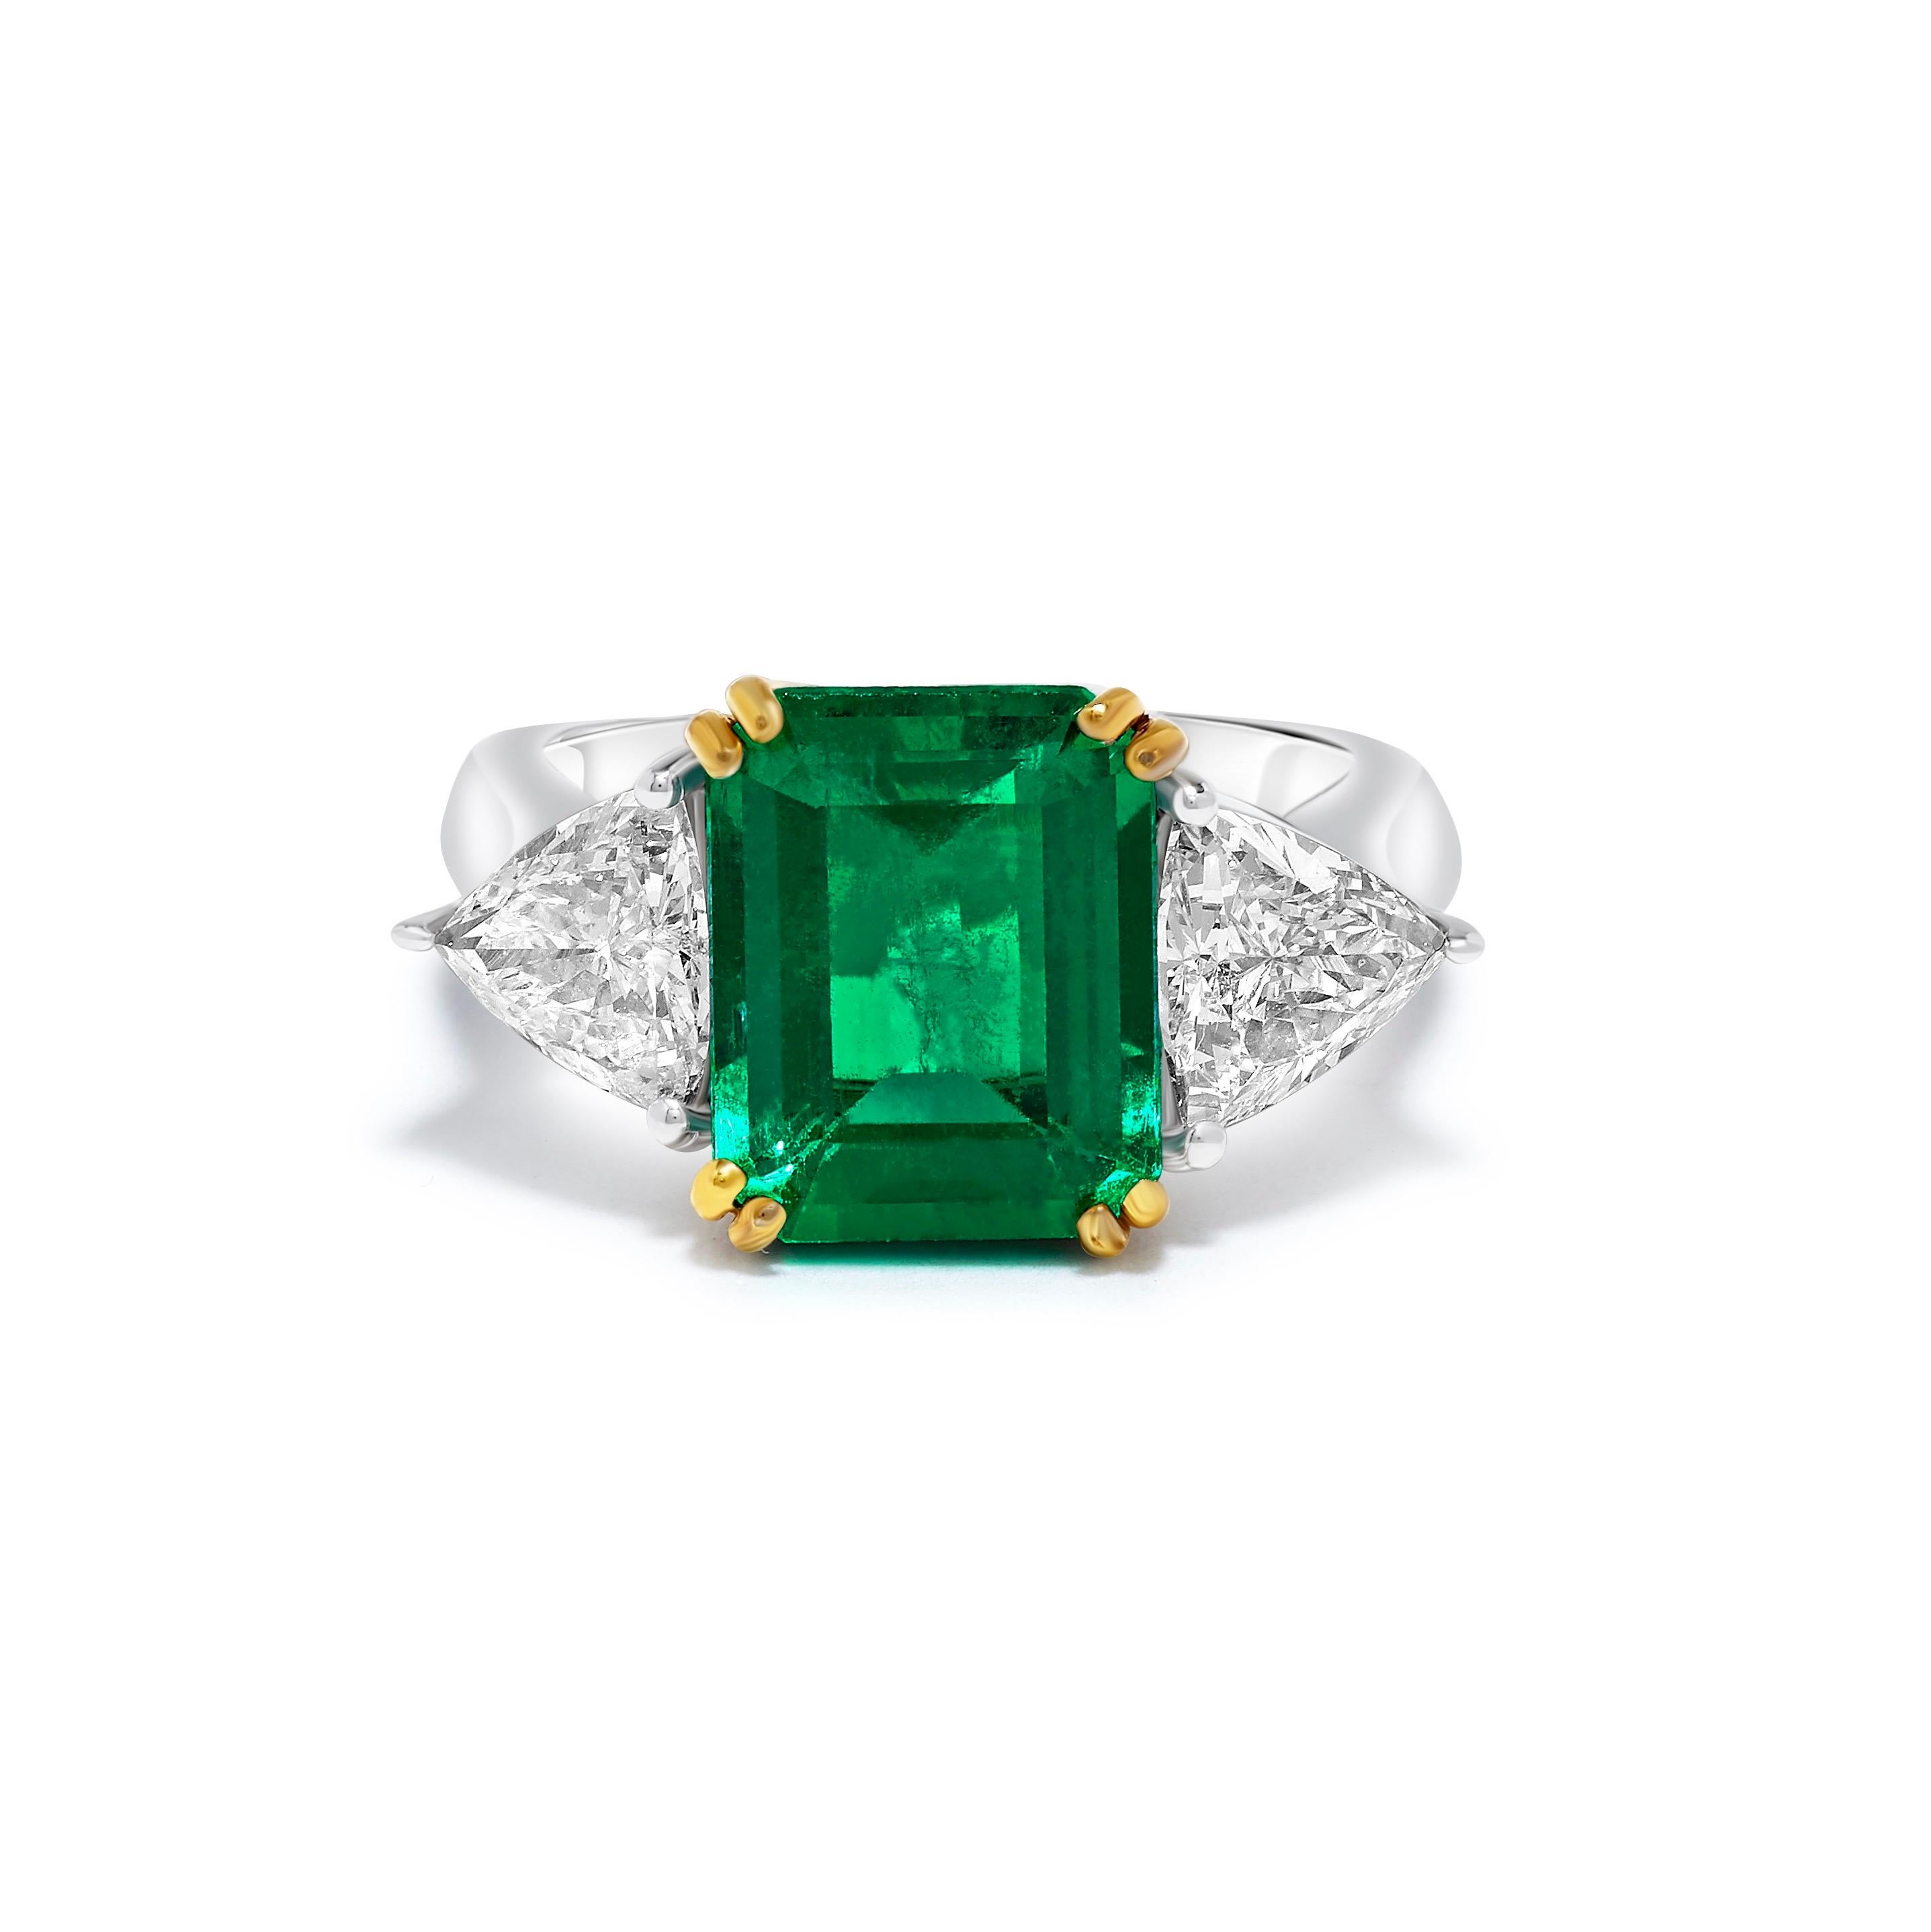 From the vault at Emilio Jewelry New York,
Center emerald super fine gem emerald: 4.42cts
Diamonds  1.60ct 
Please inquire for more details. 